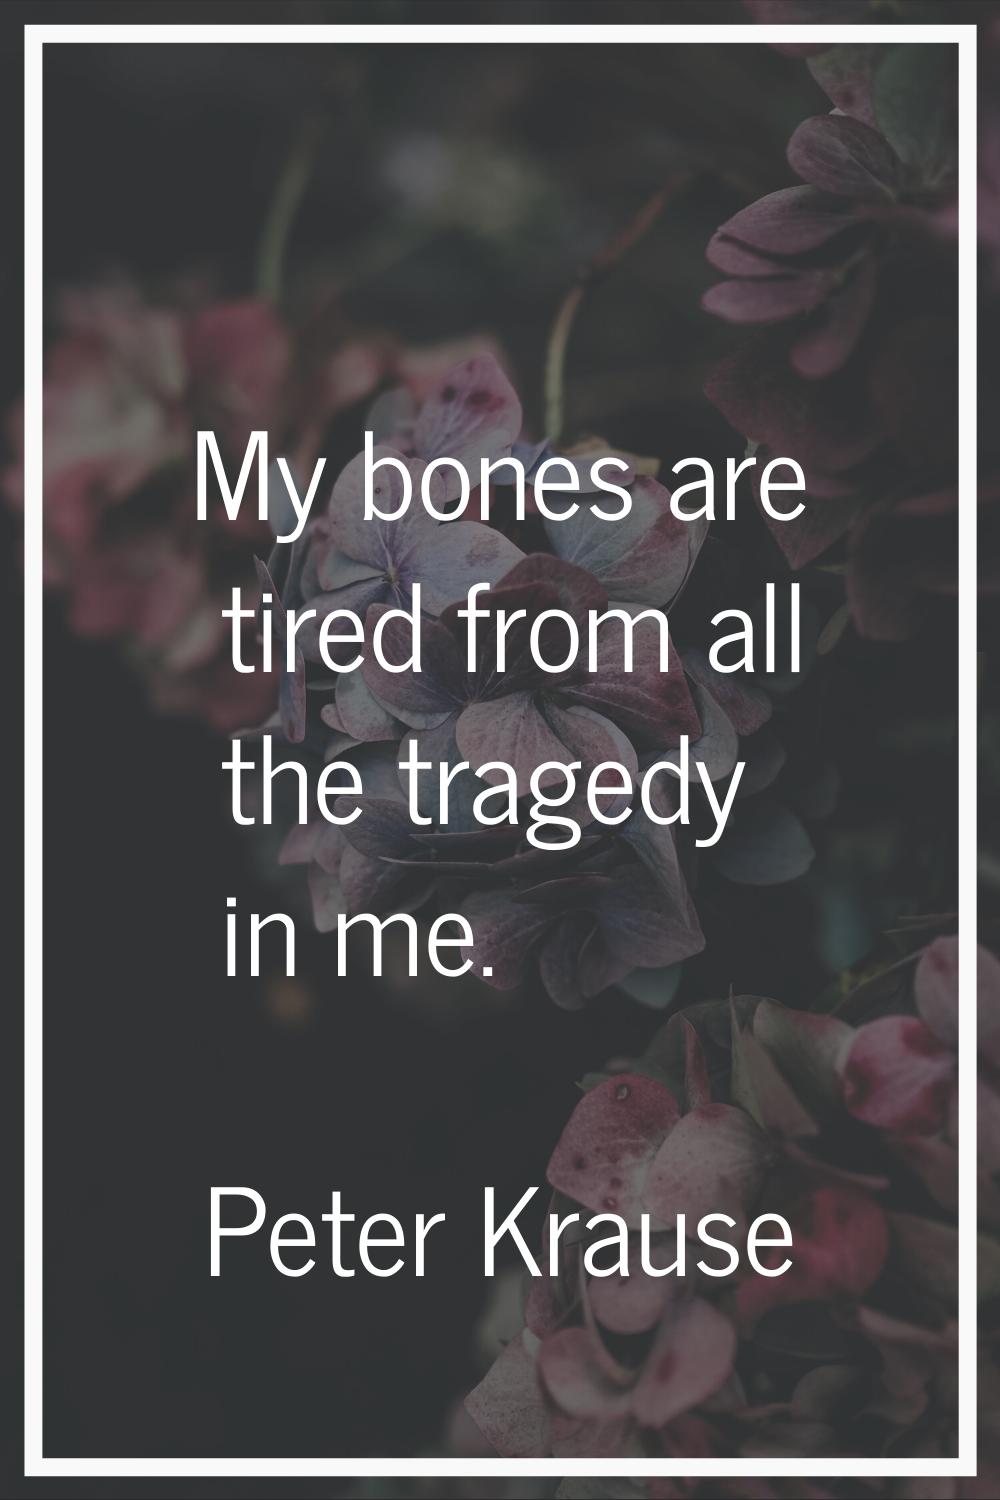 My bones are tired from all the tragedy in me.